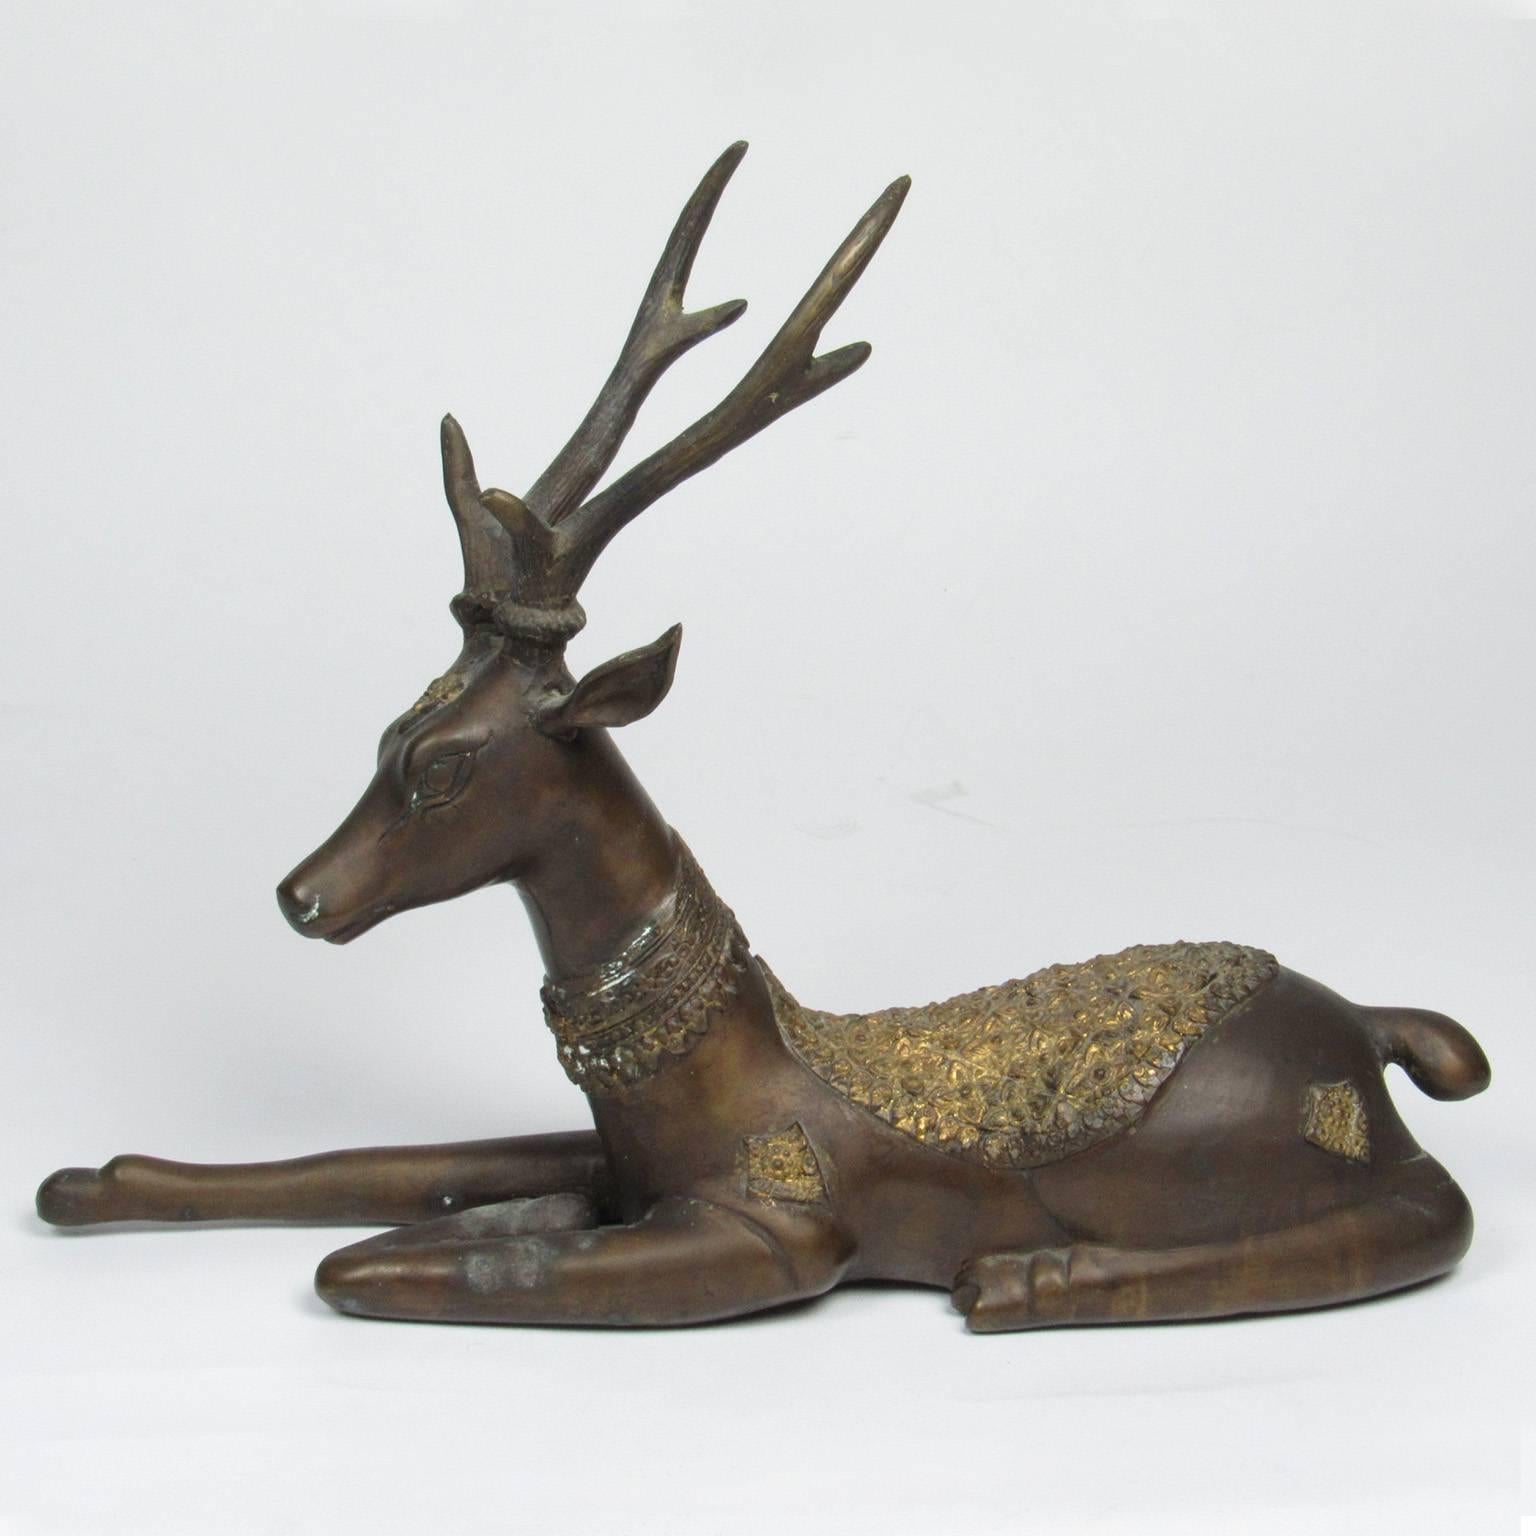 Pair of Southeast Asian bronze reclining deer, late 19th-early 20th century. Each with brown patina with decorative saddles and collars with gilt wash. Measures: Height 9 in., length: 12 in., width: 4 in.